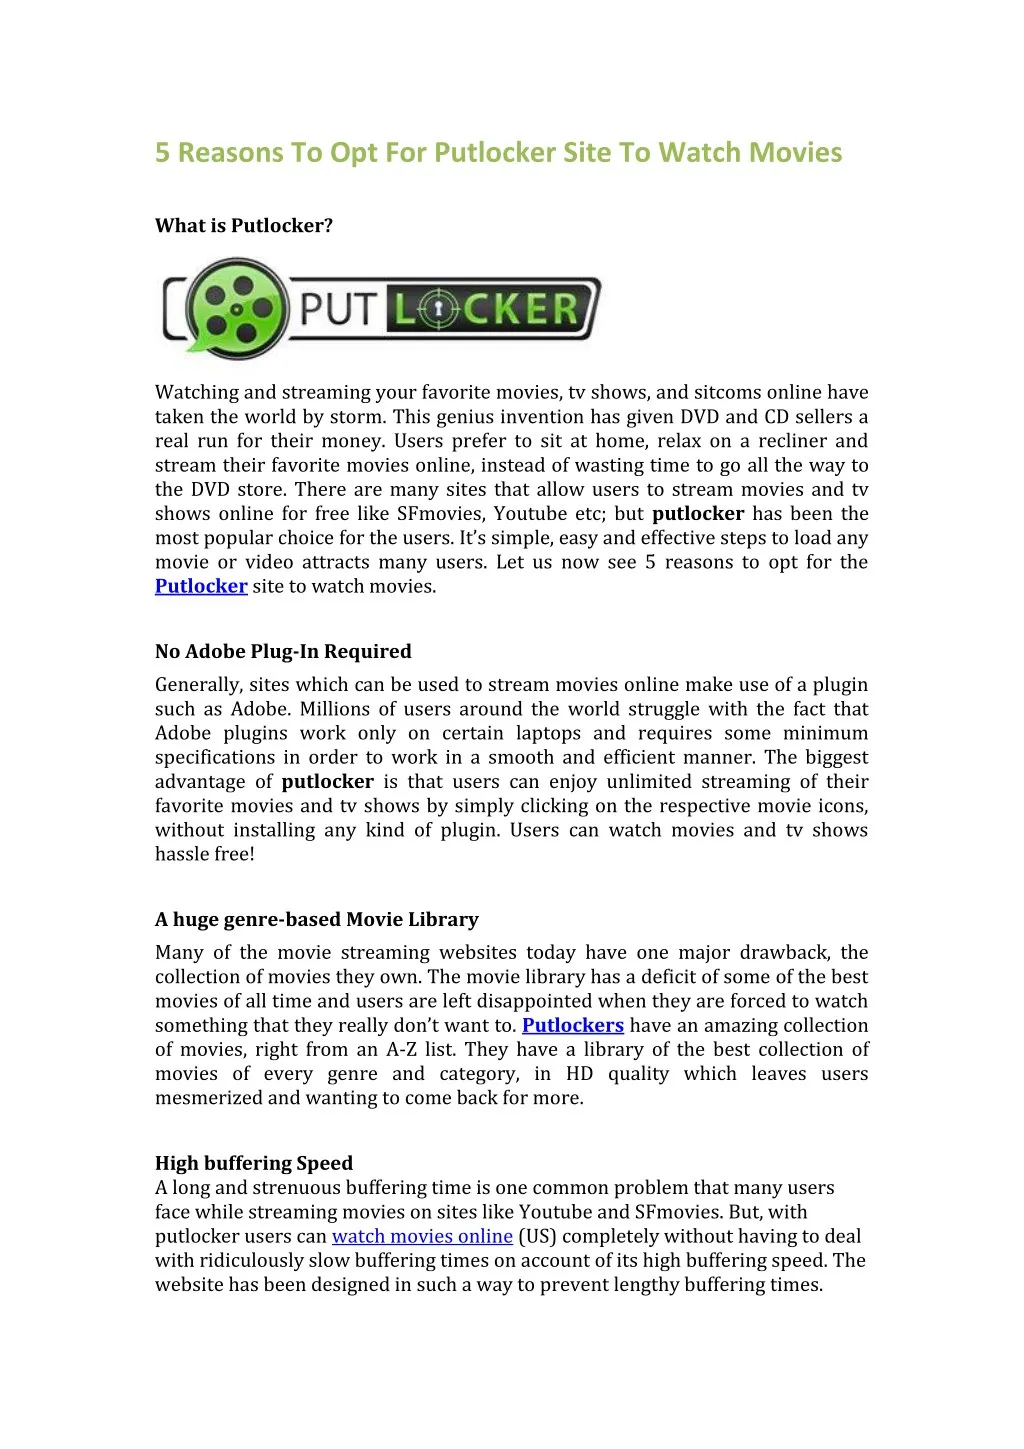 5 reasons to opt for putlocker site to watch